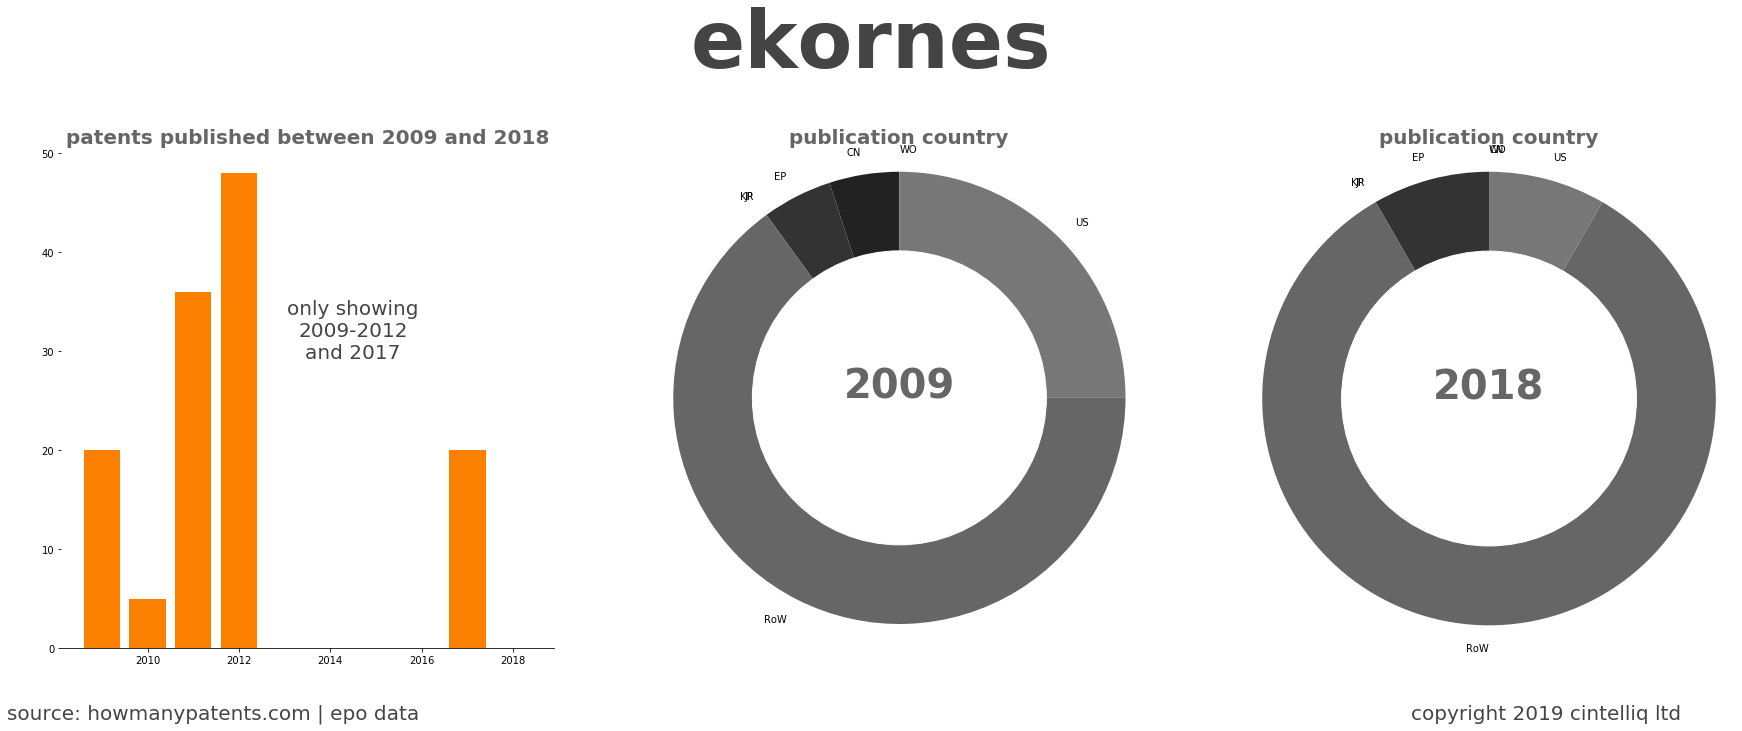 summary of patents for Ekornes